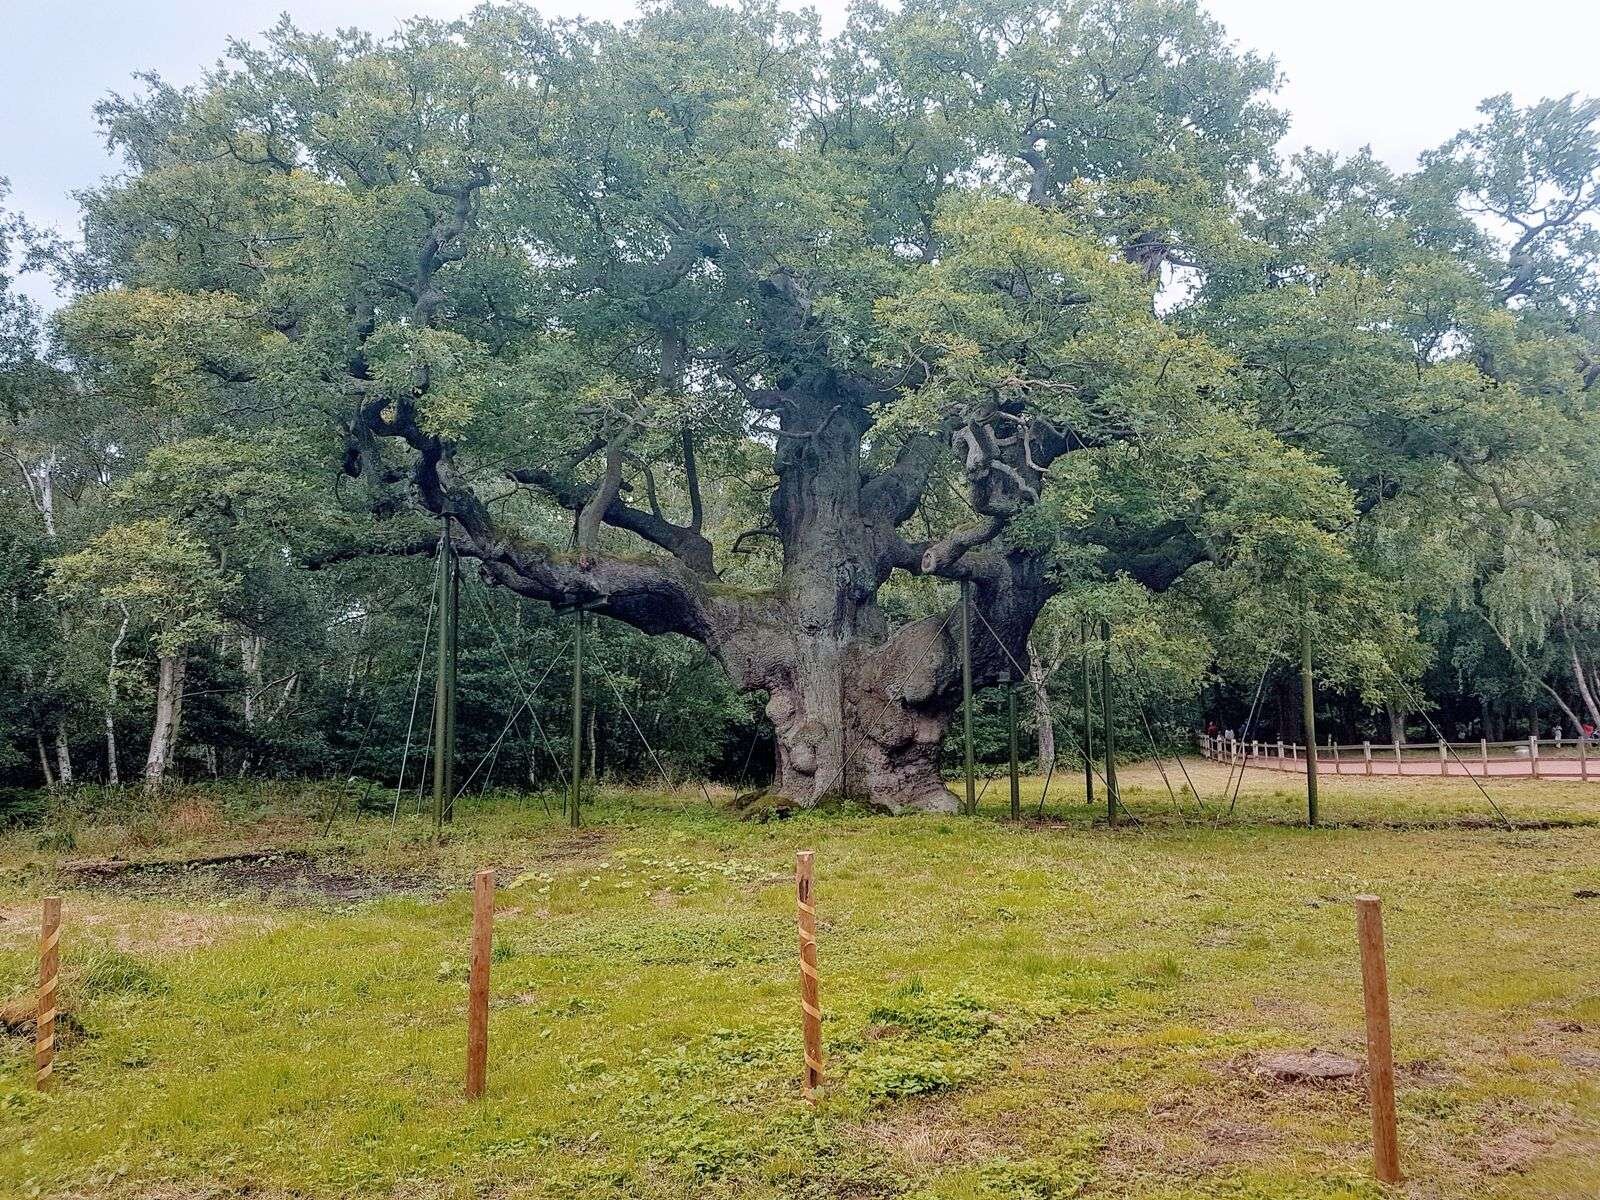 A large oak tree held up by wooden stakes in Nottingham Sherwood forest